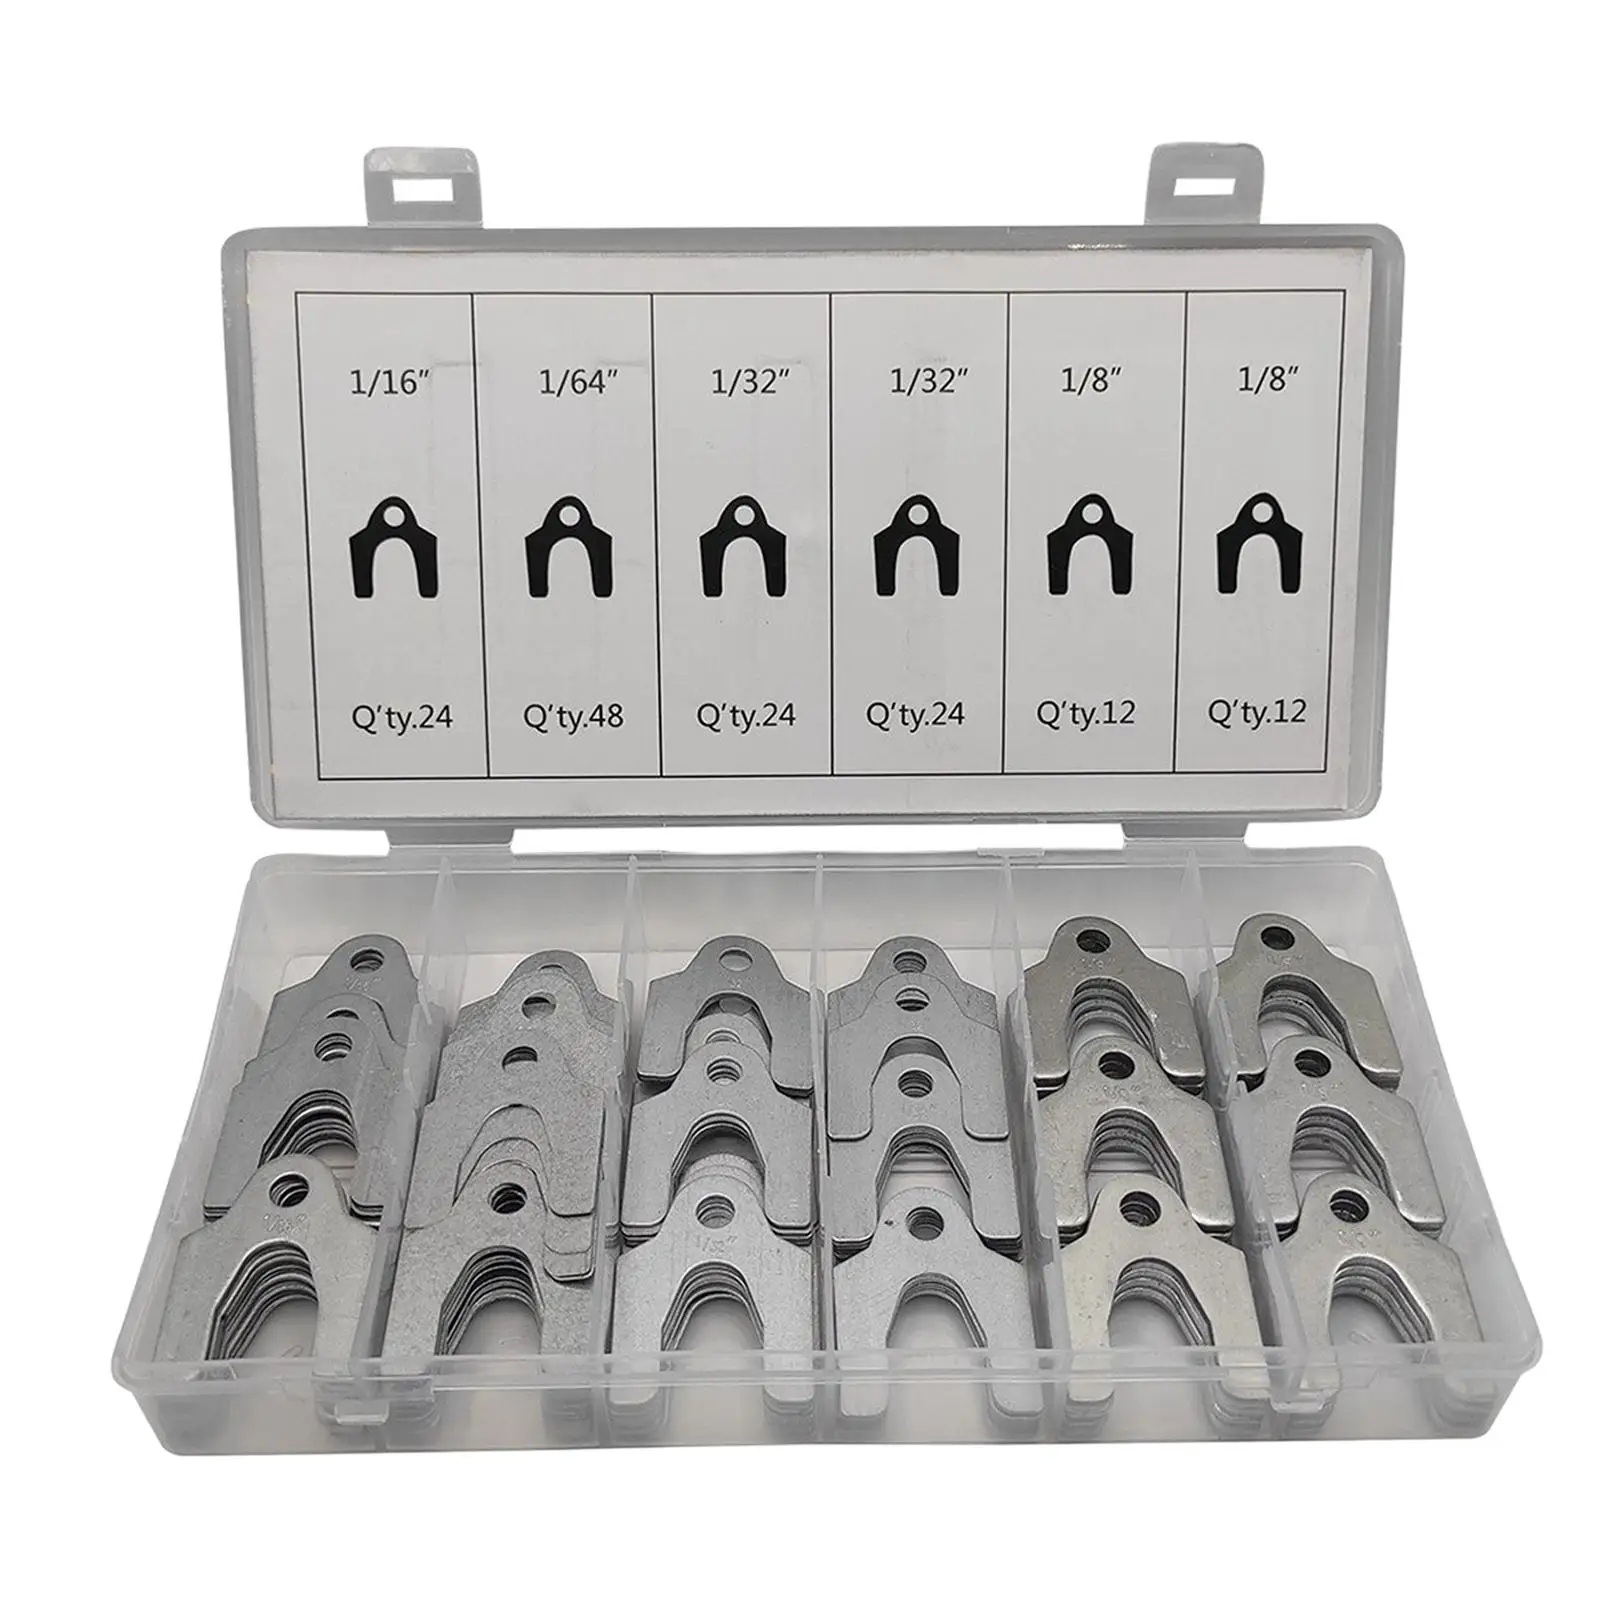 

144 Auto Alignment shim Alignment Shims Assortment Set/ with Storage Box/ Universal/ for Camber Alignment Adjusting Body Parts